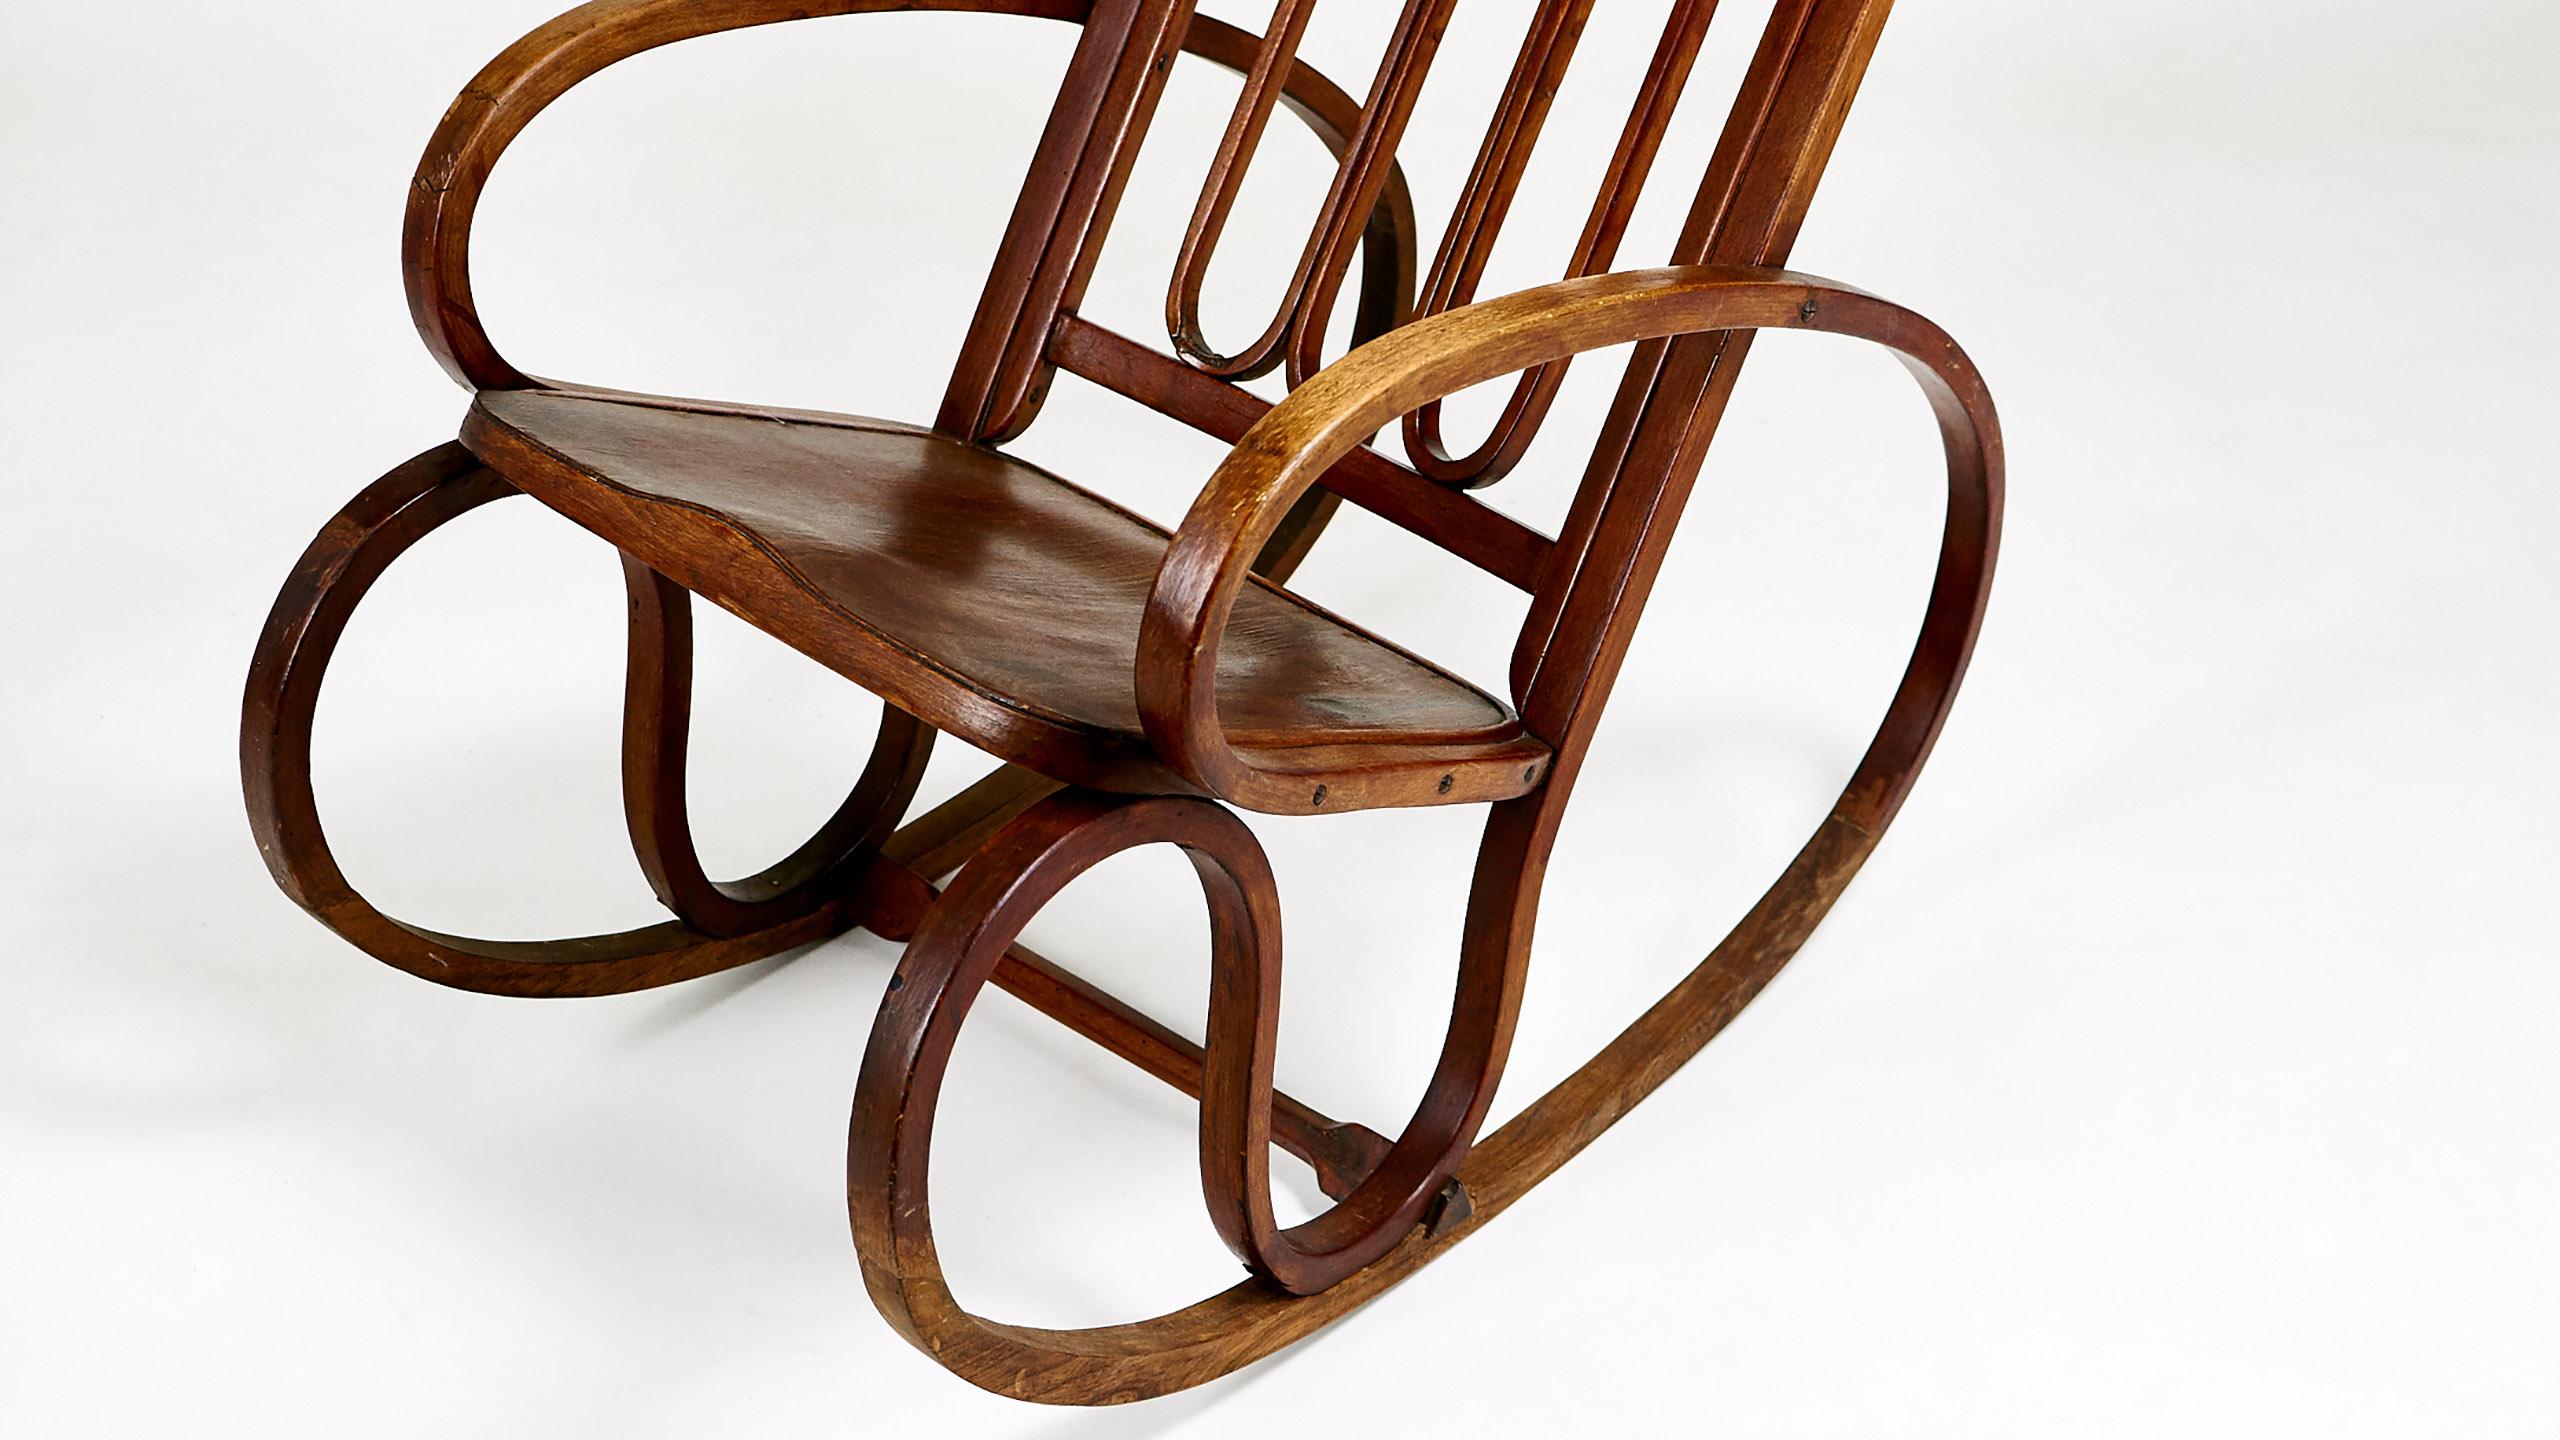 Early 20th Century Gustav Siegel, Viennese Secession Rocking Chair, Bentwood, circa 1900